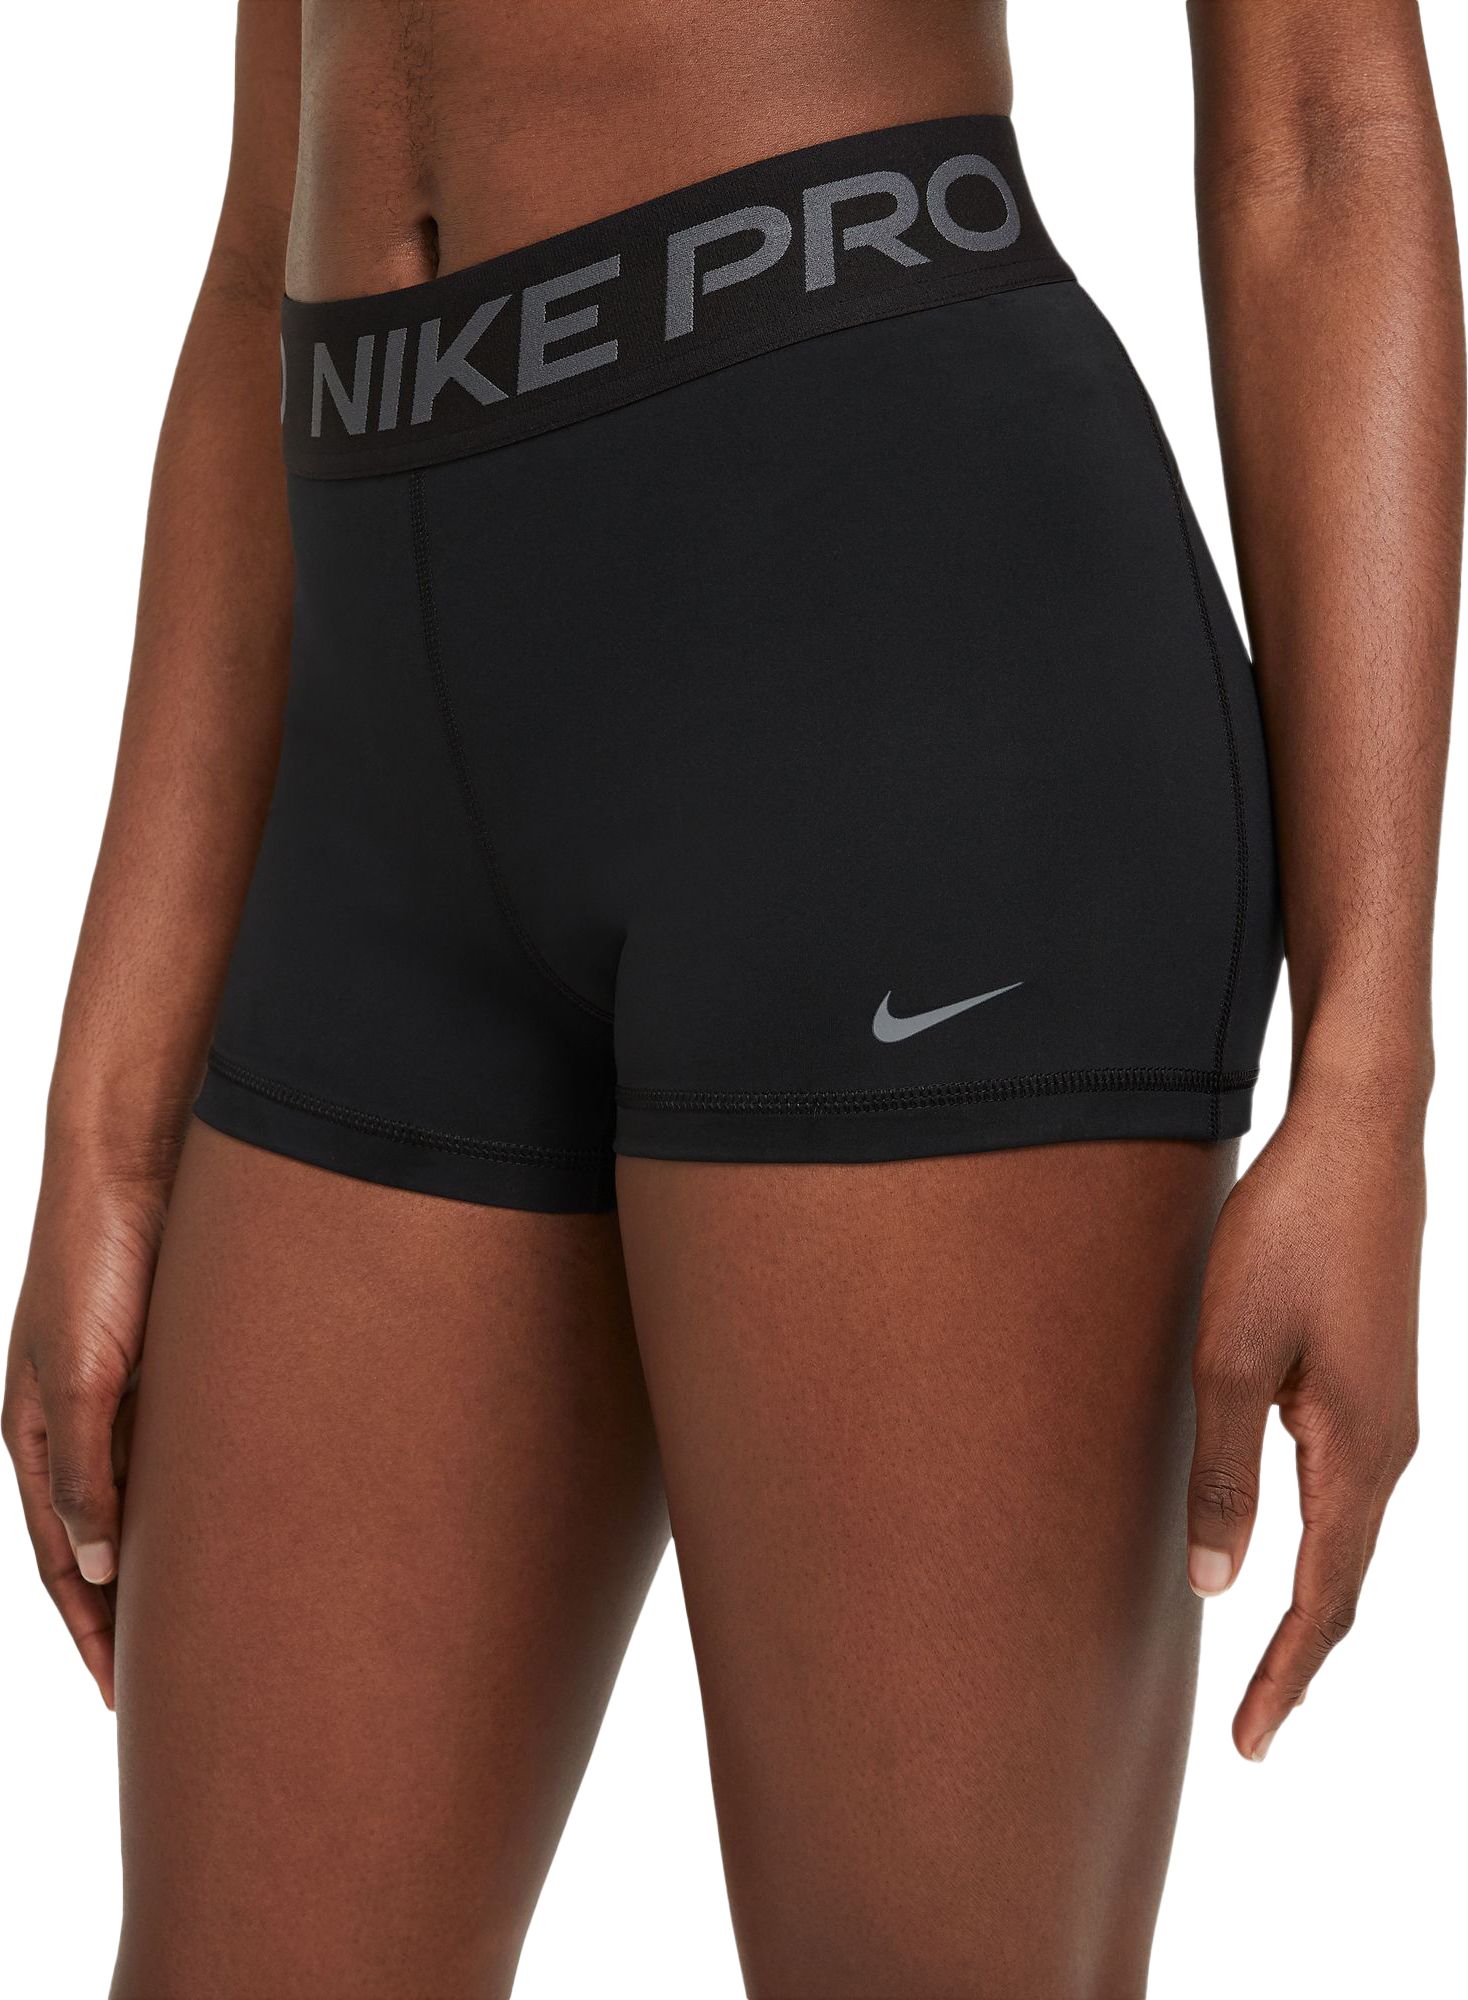 where do they sell nike pros